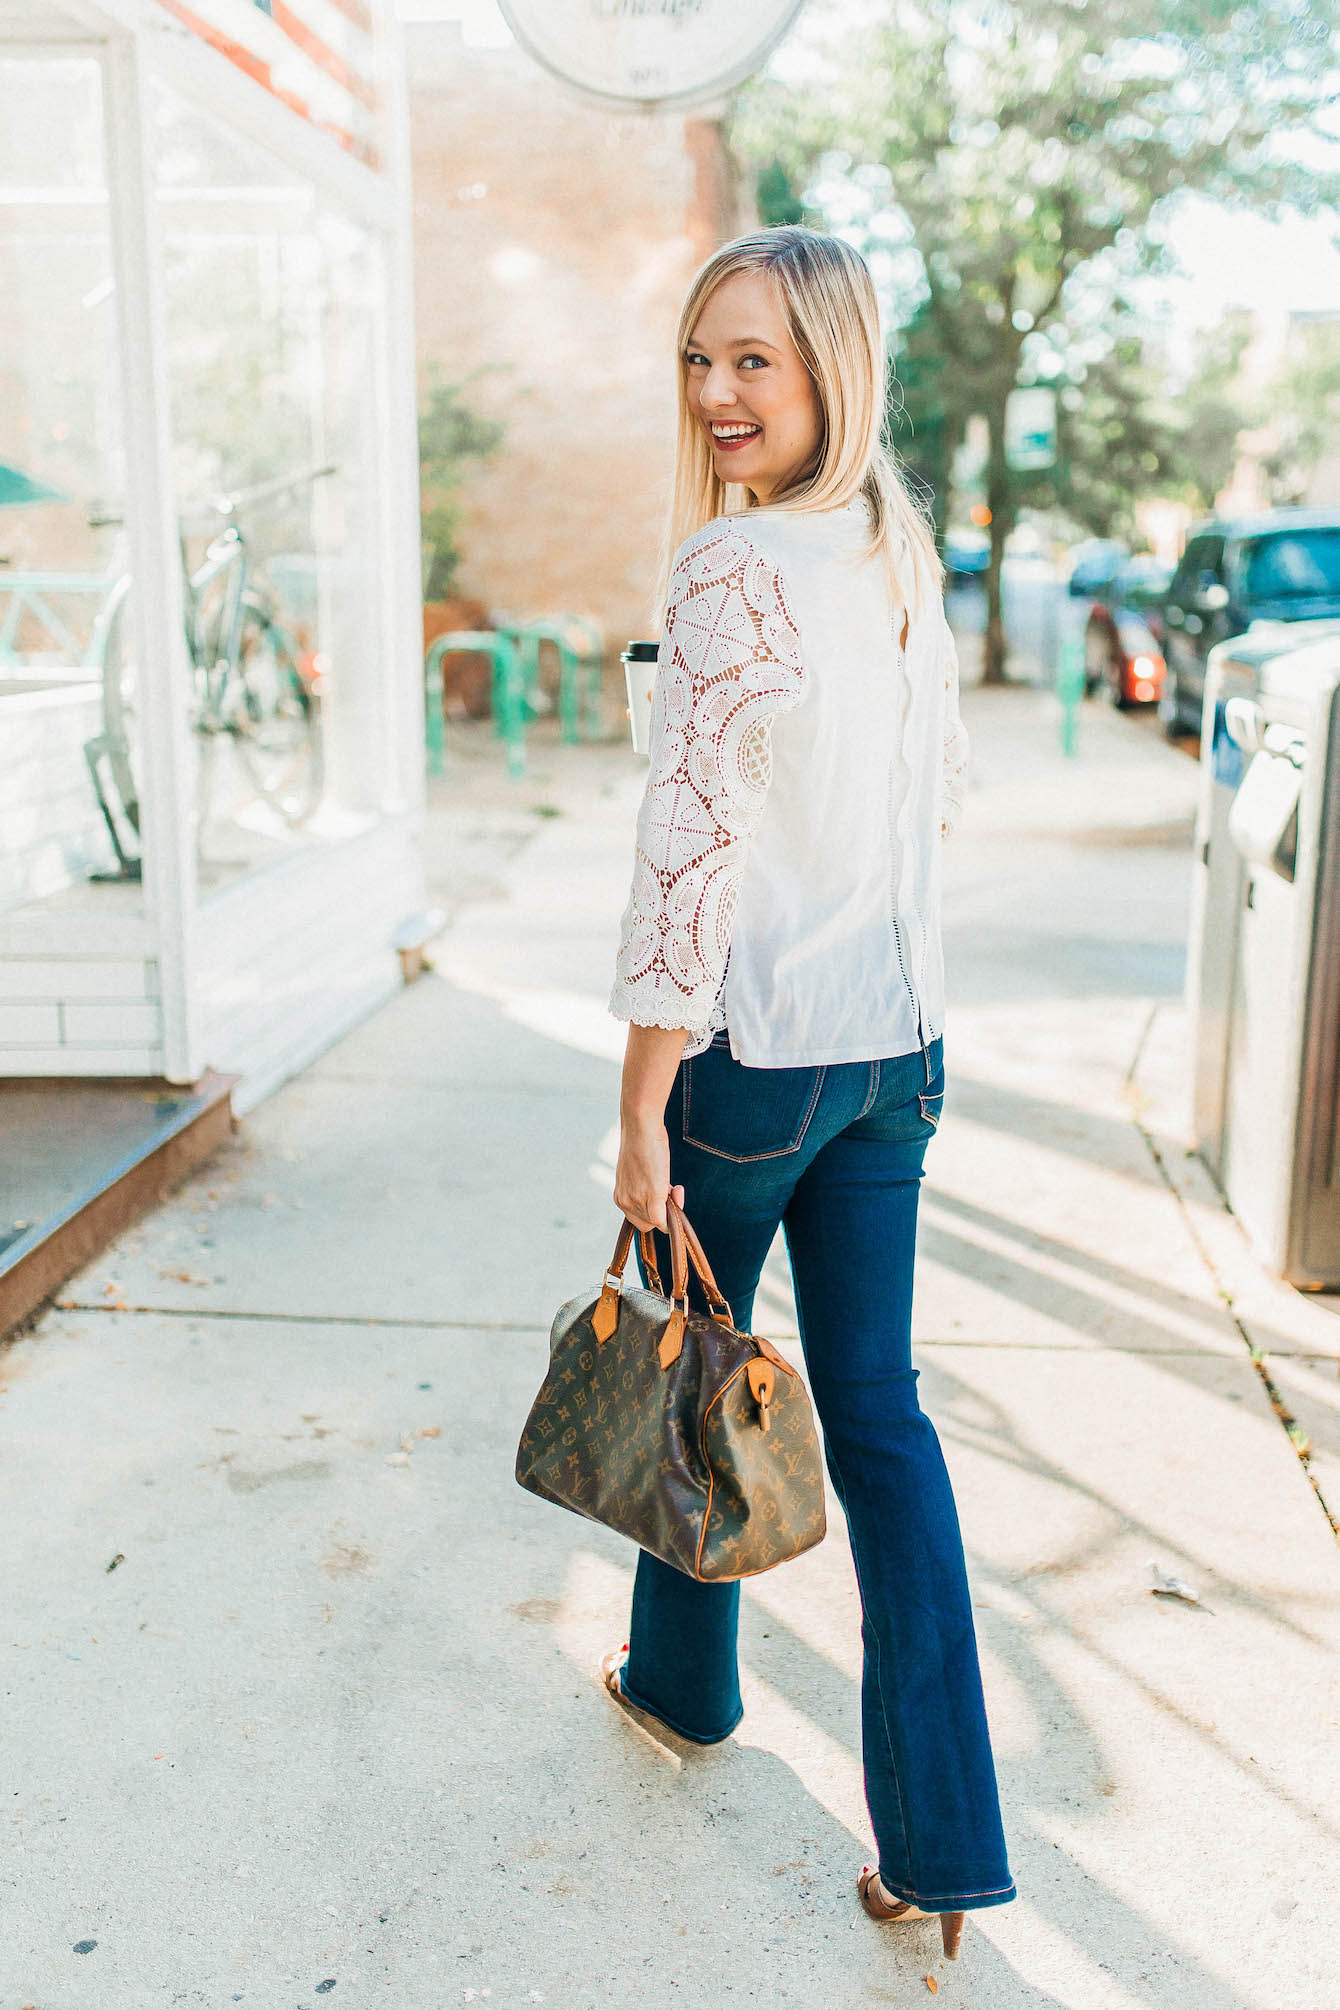 Feeling Like Fall: Anthropologie White Lace Top | Charmingly Styled